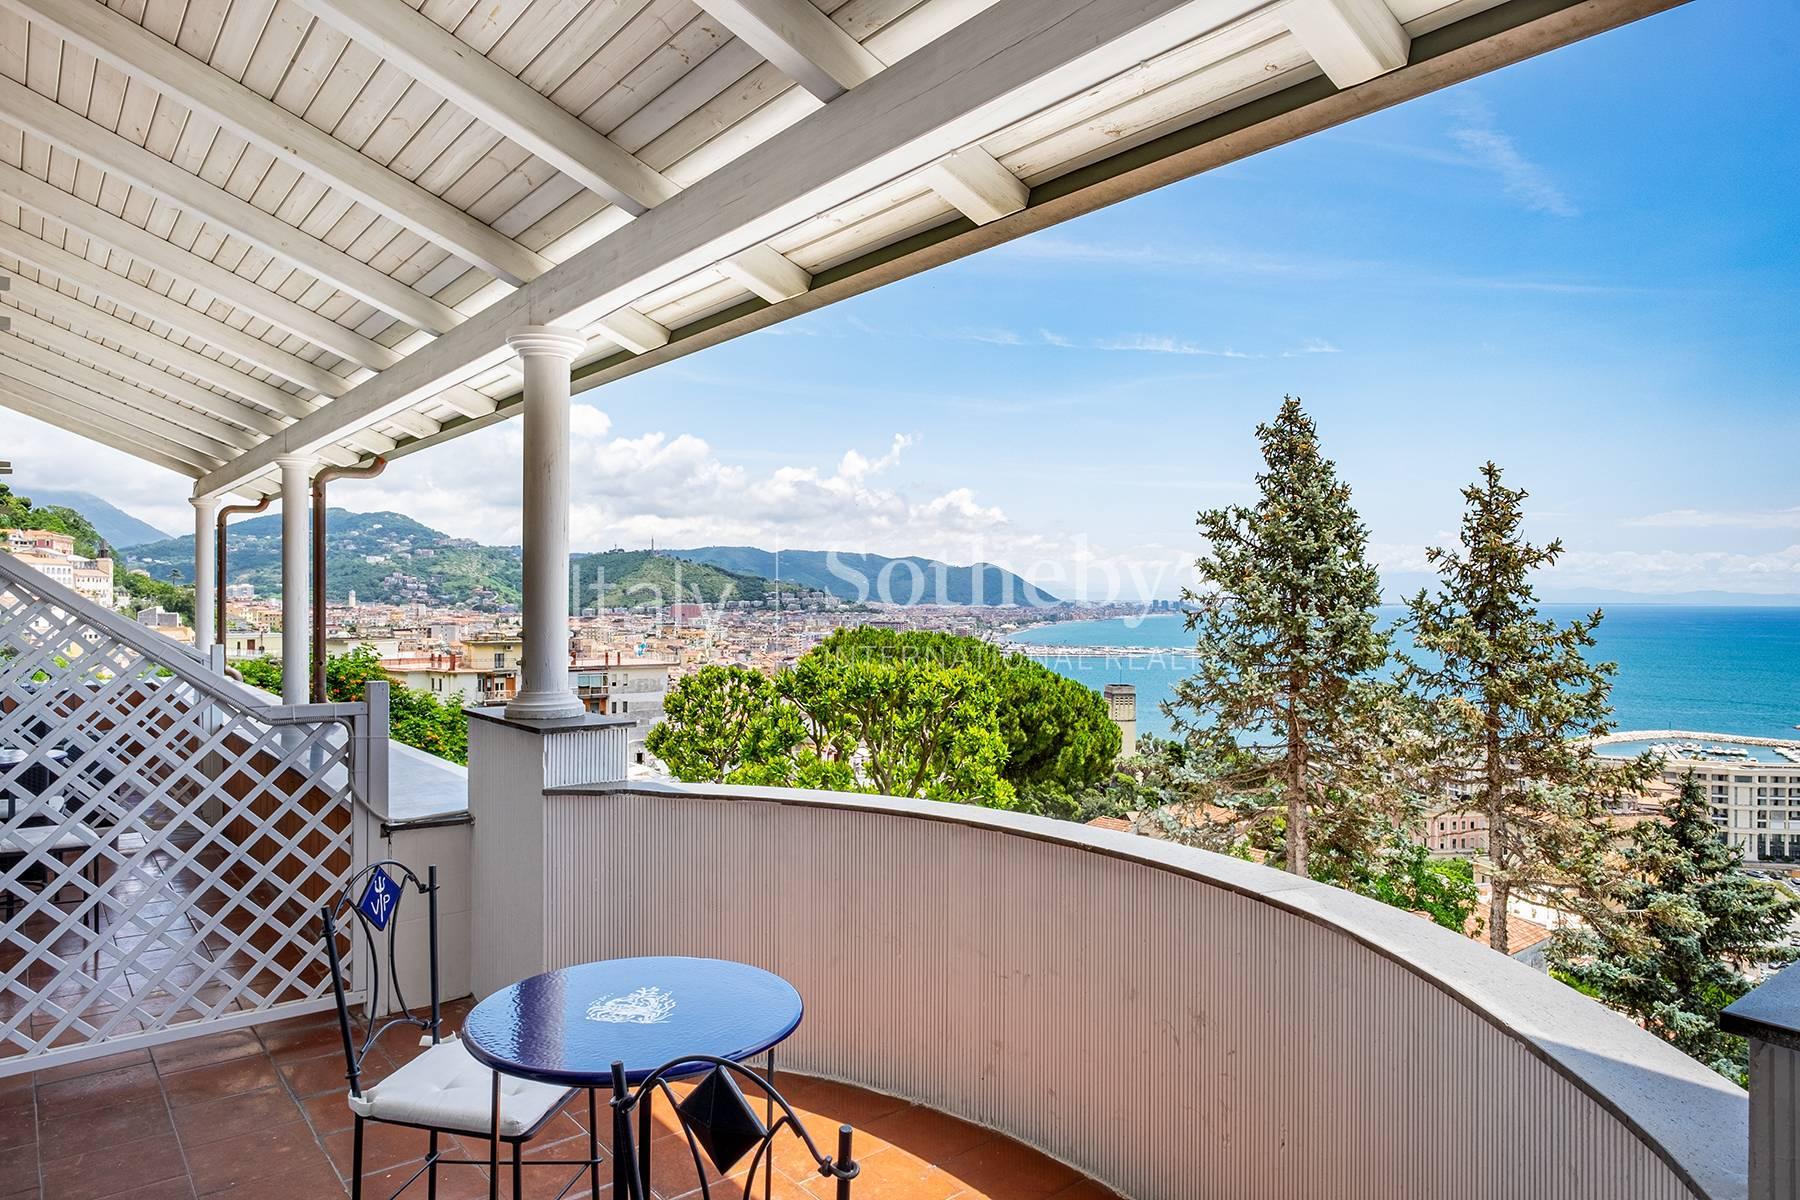 Exclusive villa with panoramic terraces and gardens close to Salerno and Vietri sul Mare - 25